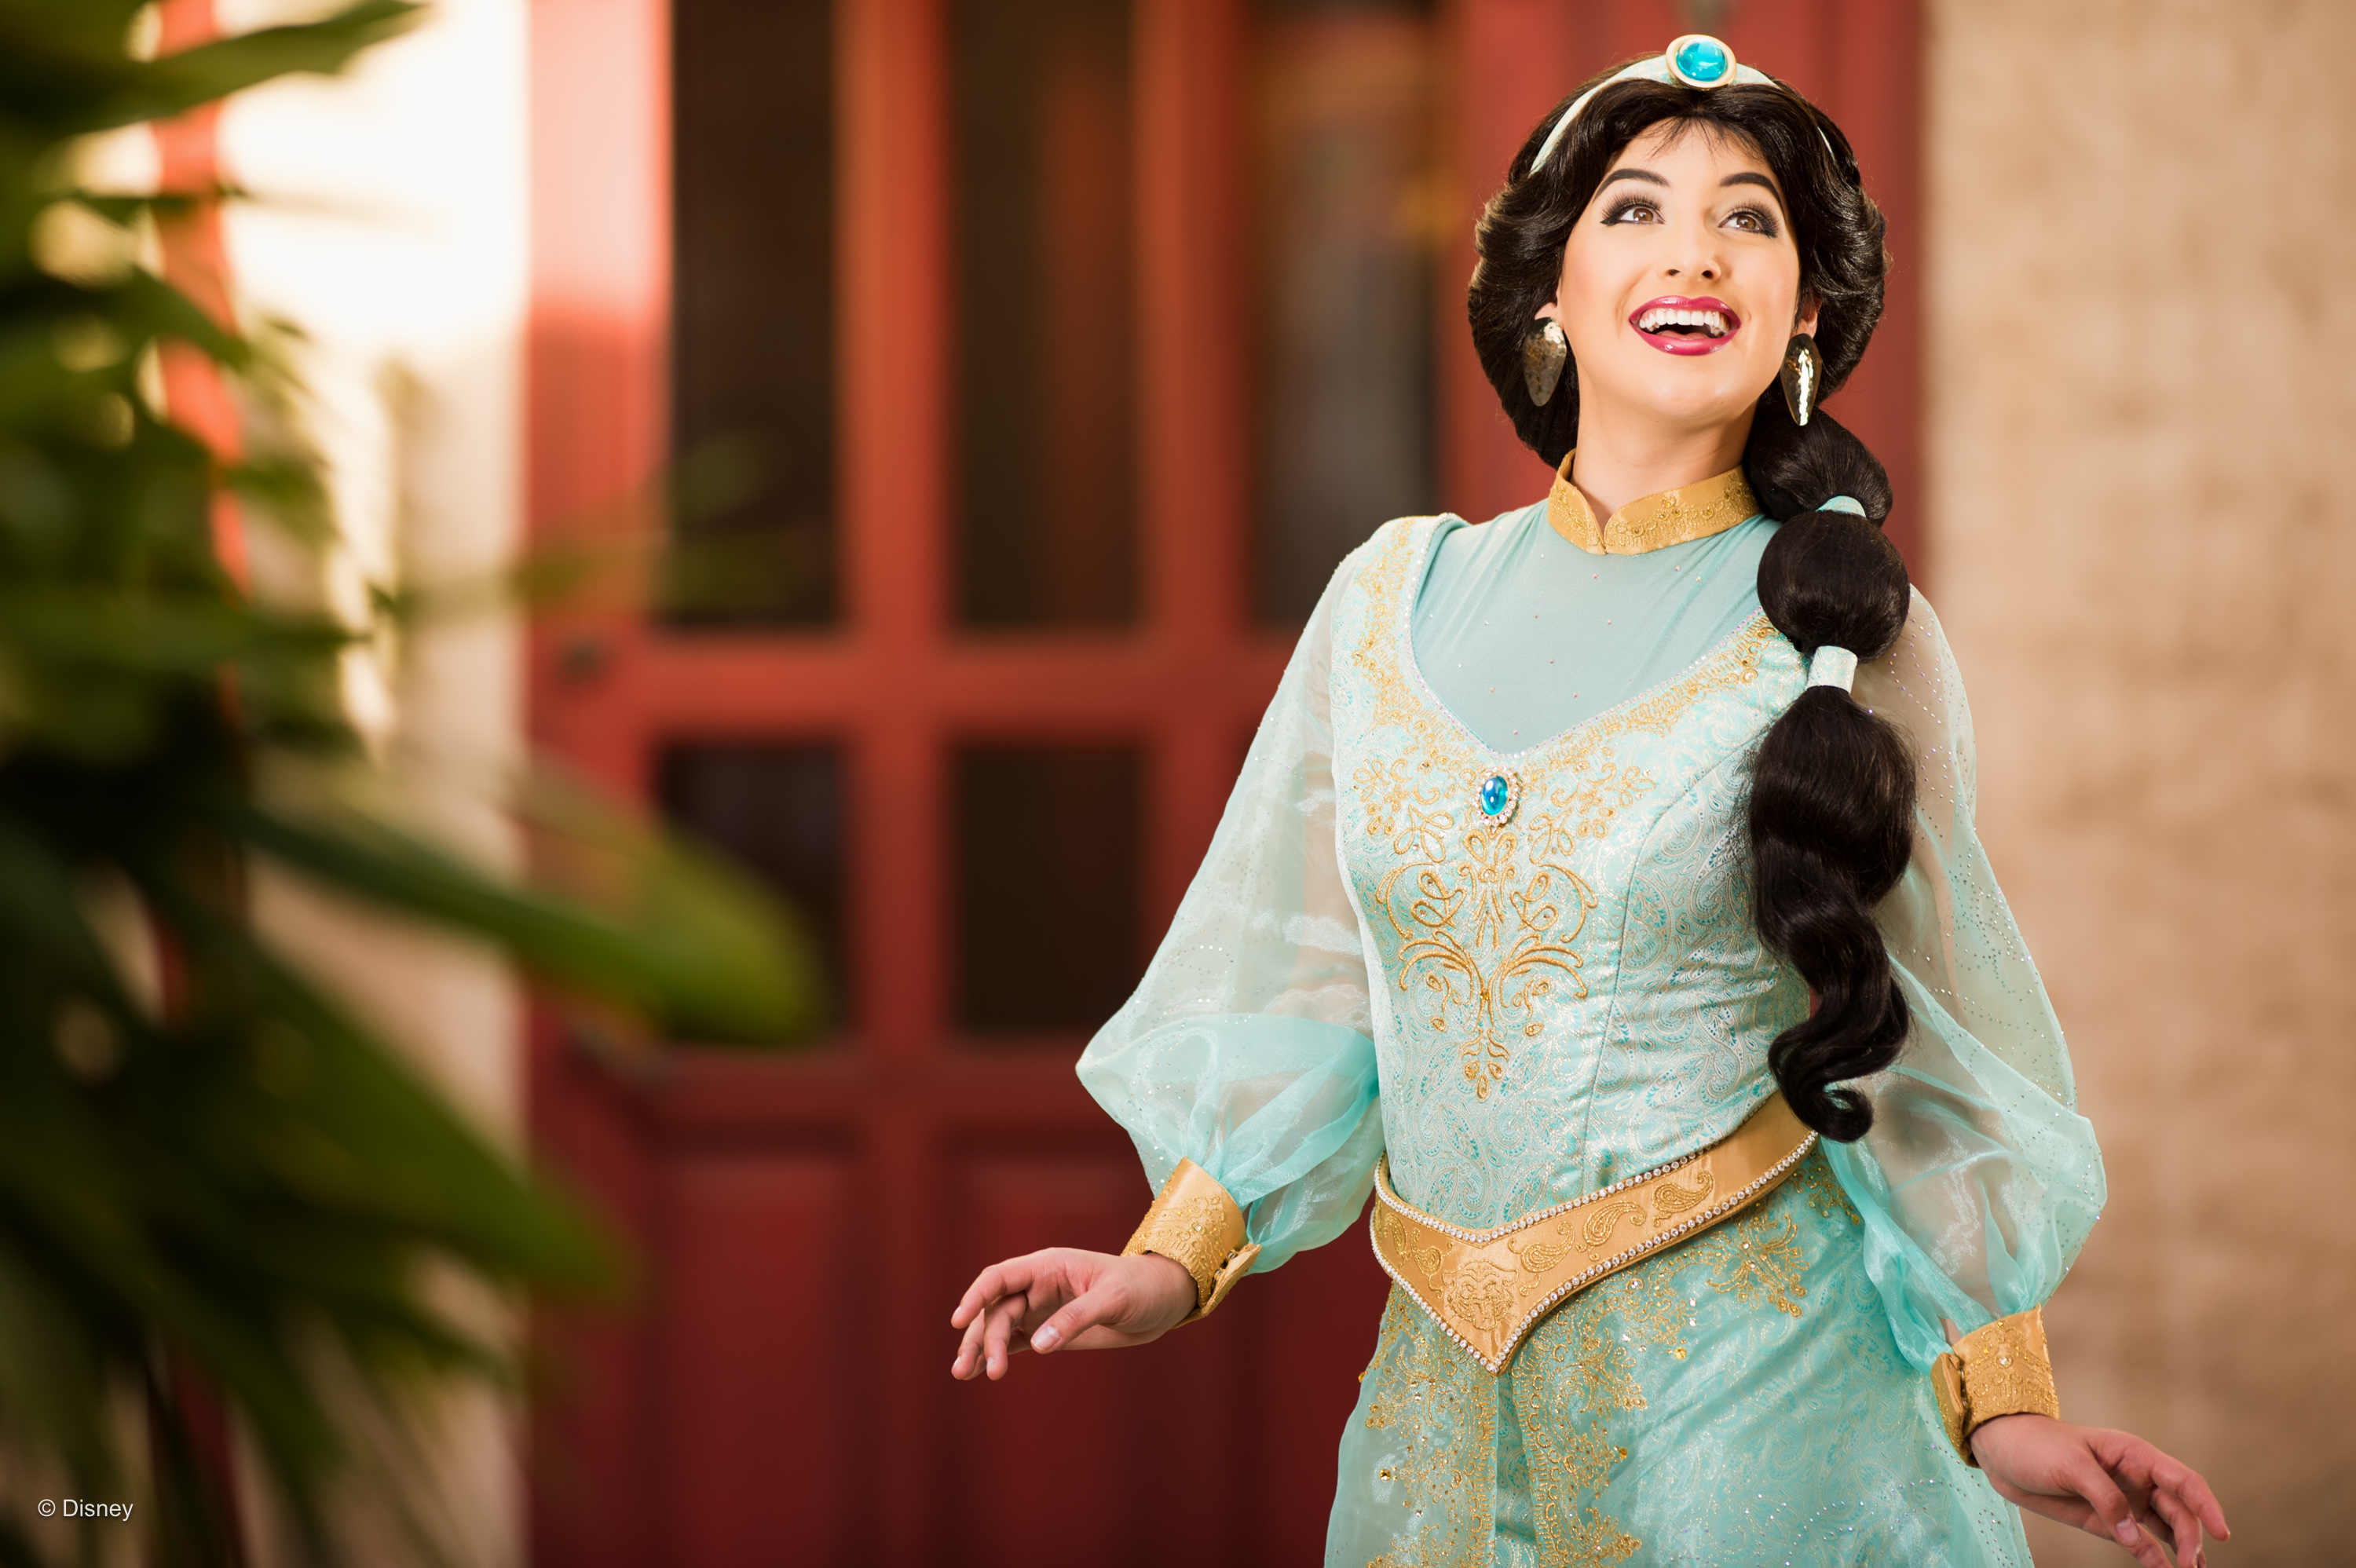 Where to Meet all the Walt Disney World Princesses, a guide featured by top US Disney blogger, Marcie and the Mouse: Families can meet Princess Jasmine at Epcot at Walt Disney World